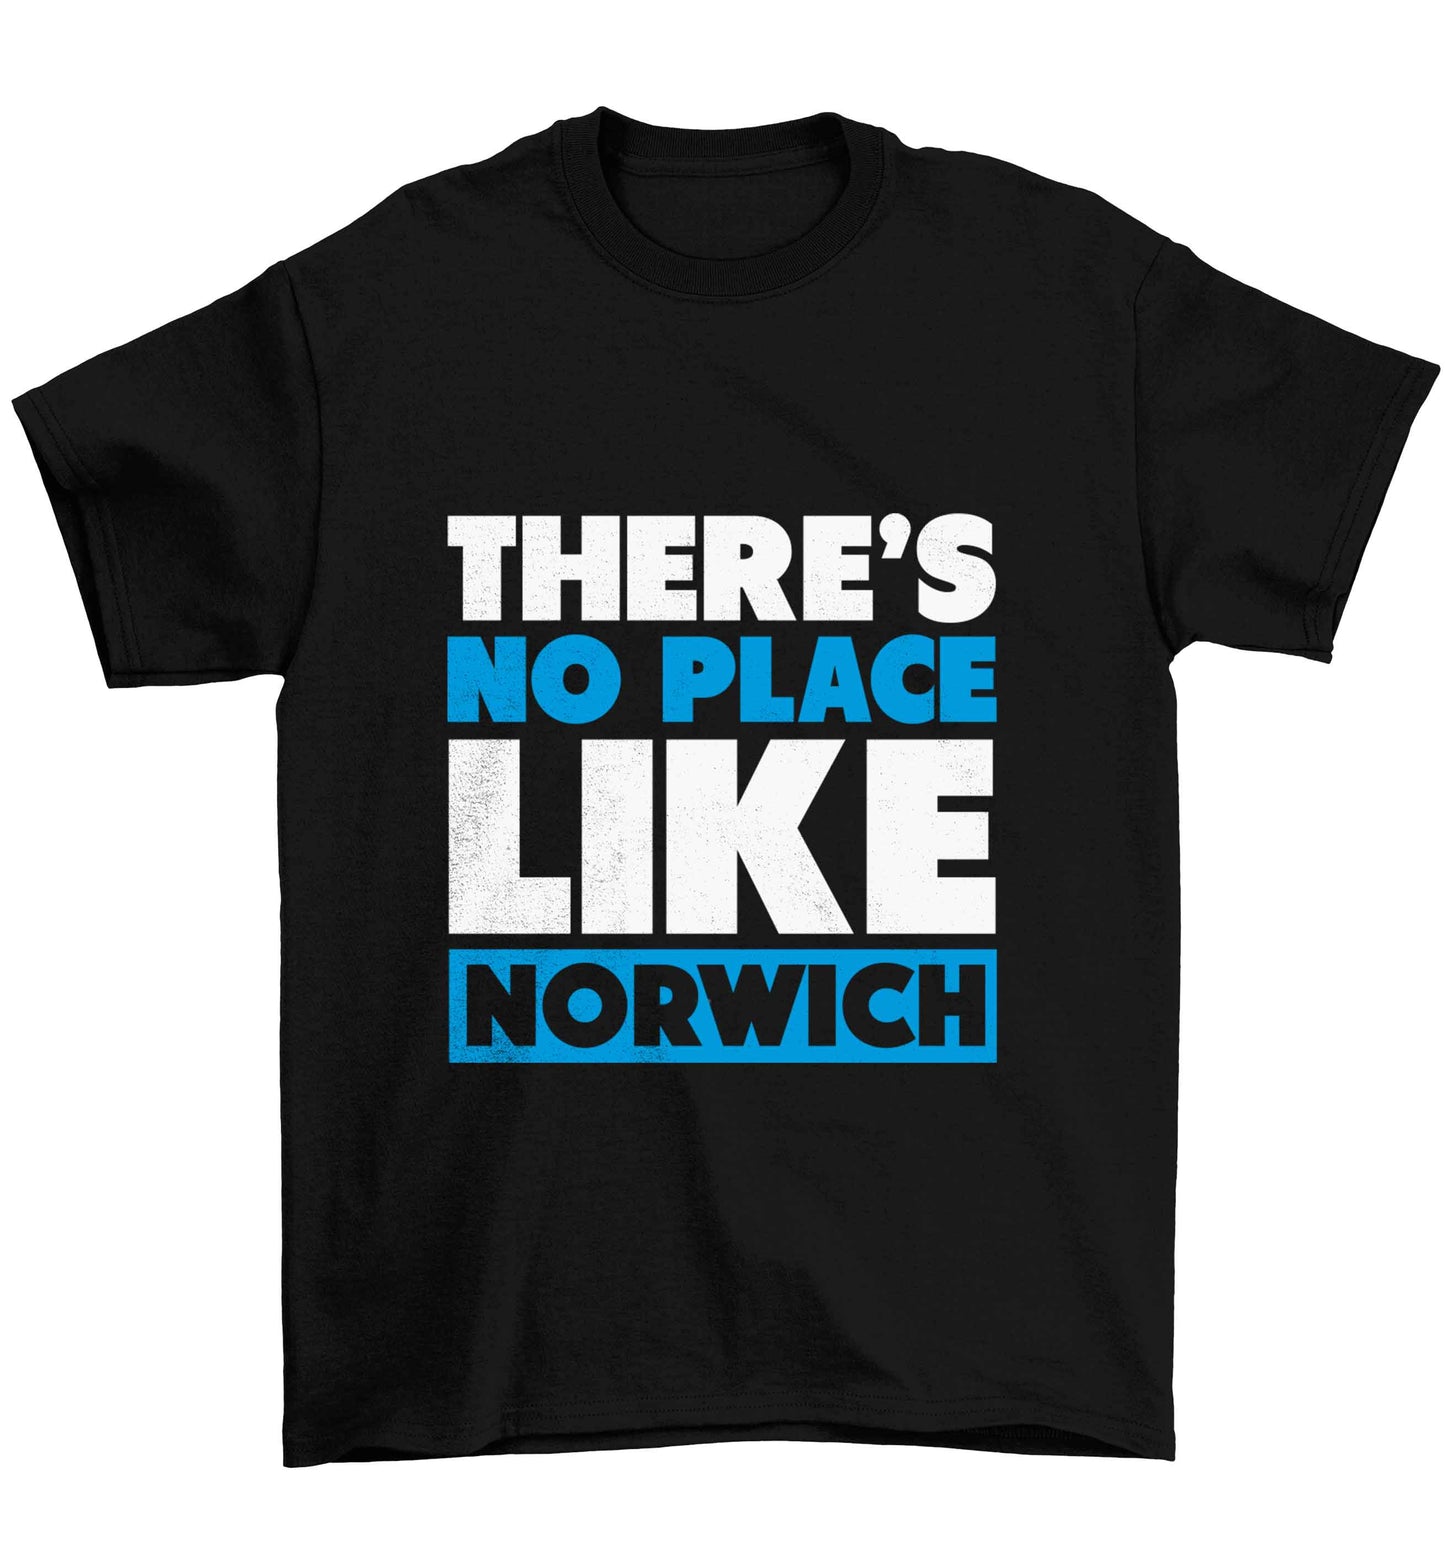 There's no place like Norwich Children's black Tshirt 12-13 Years